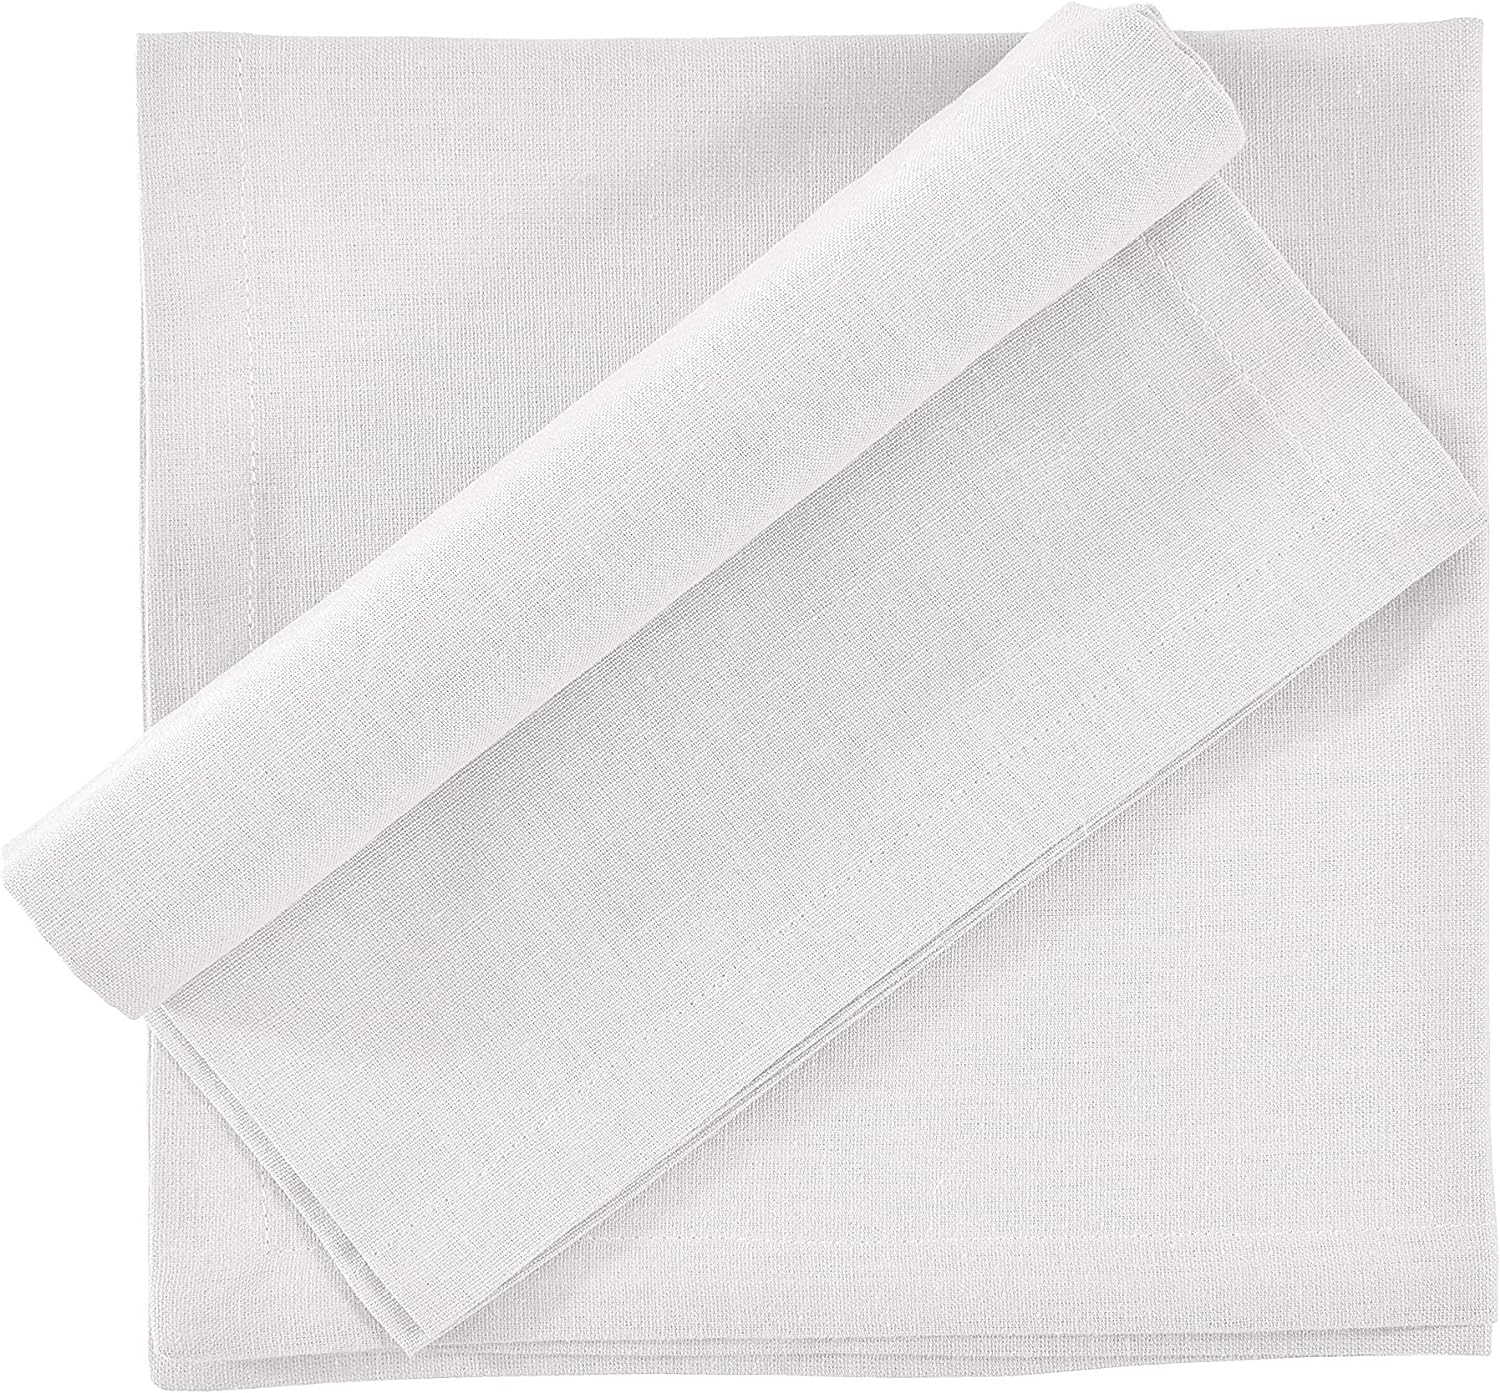 FINGERCRAFT Dinner Cloth Napkins, Cotton Linen Blend Fabric 12 Pack White Easter Special, Premium Quality, Mitered Corners for Every Day Use Napkins are Pre Shrunk and Good Absorbency White 3